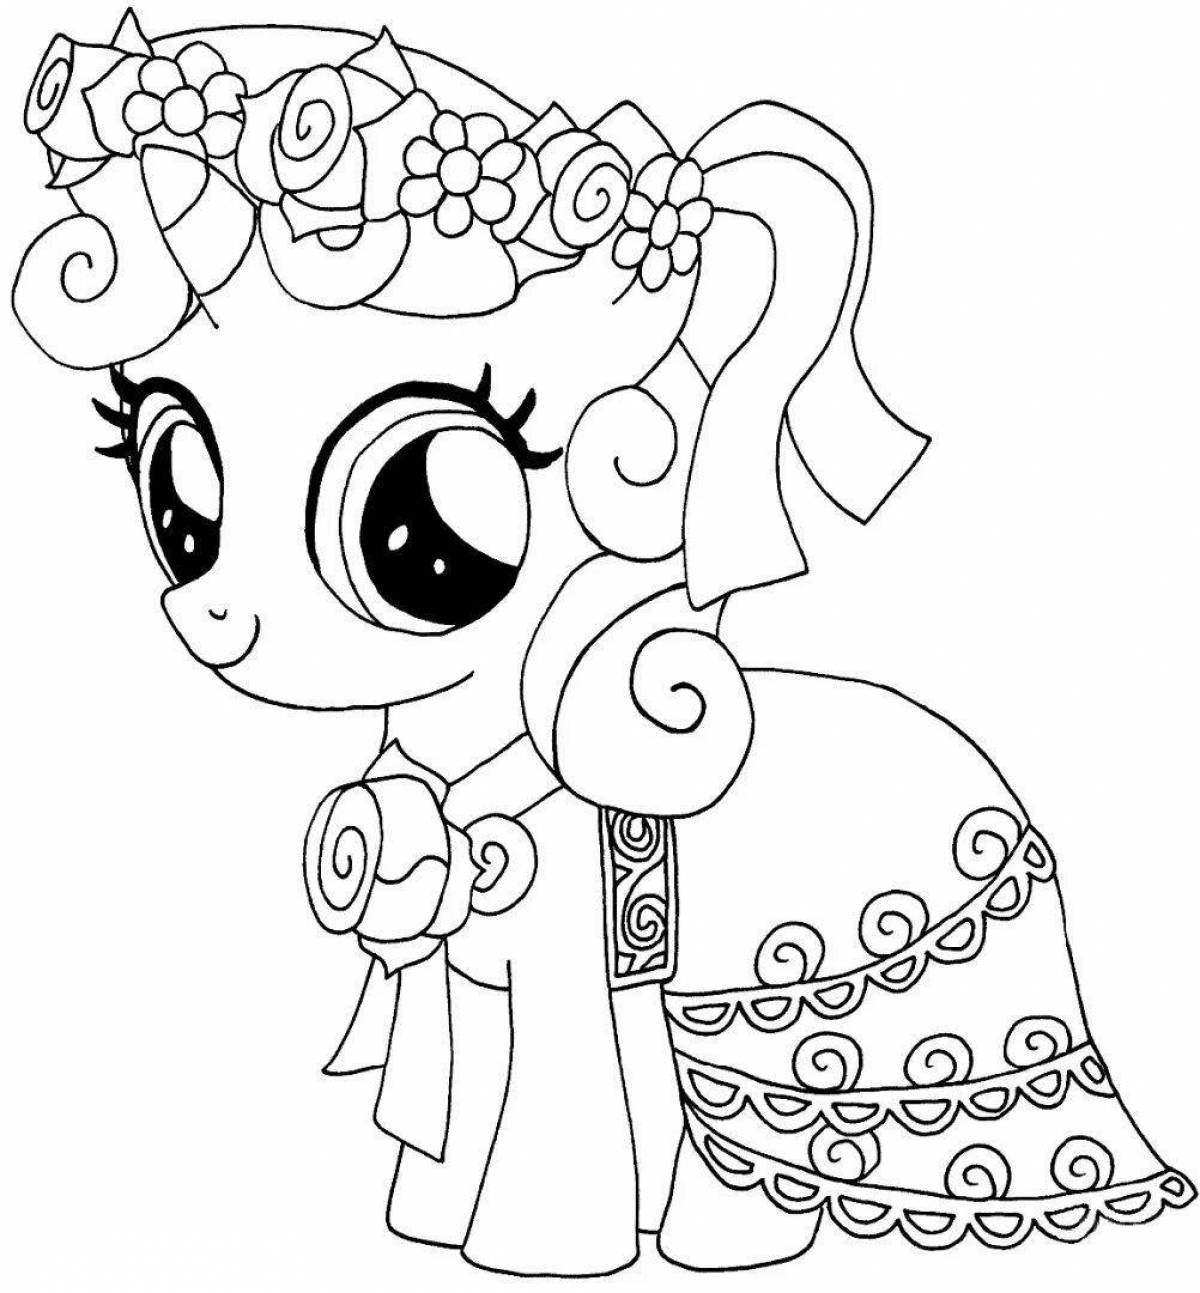 Playful pony coloring for girls 4-5 years old